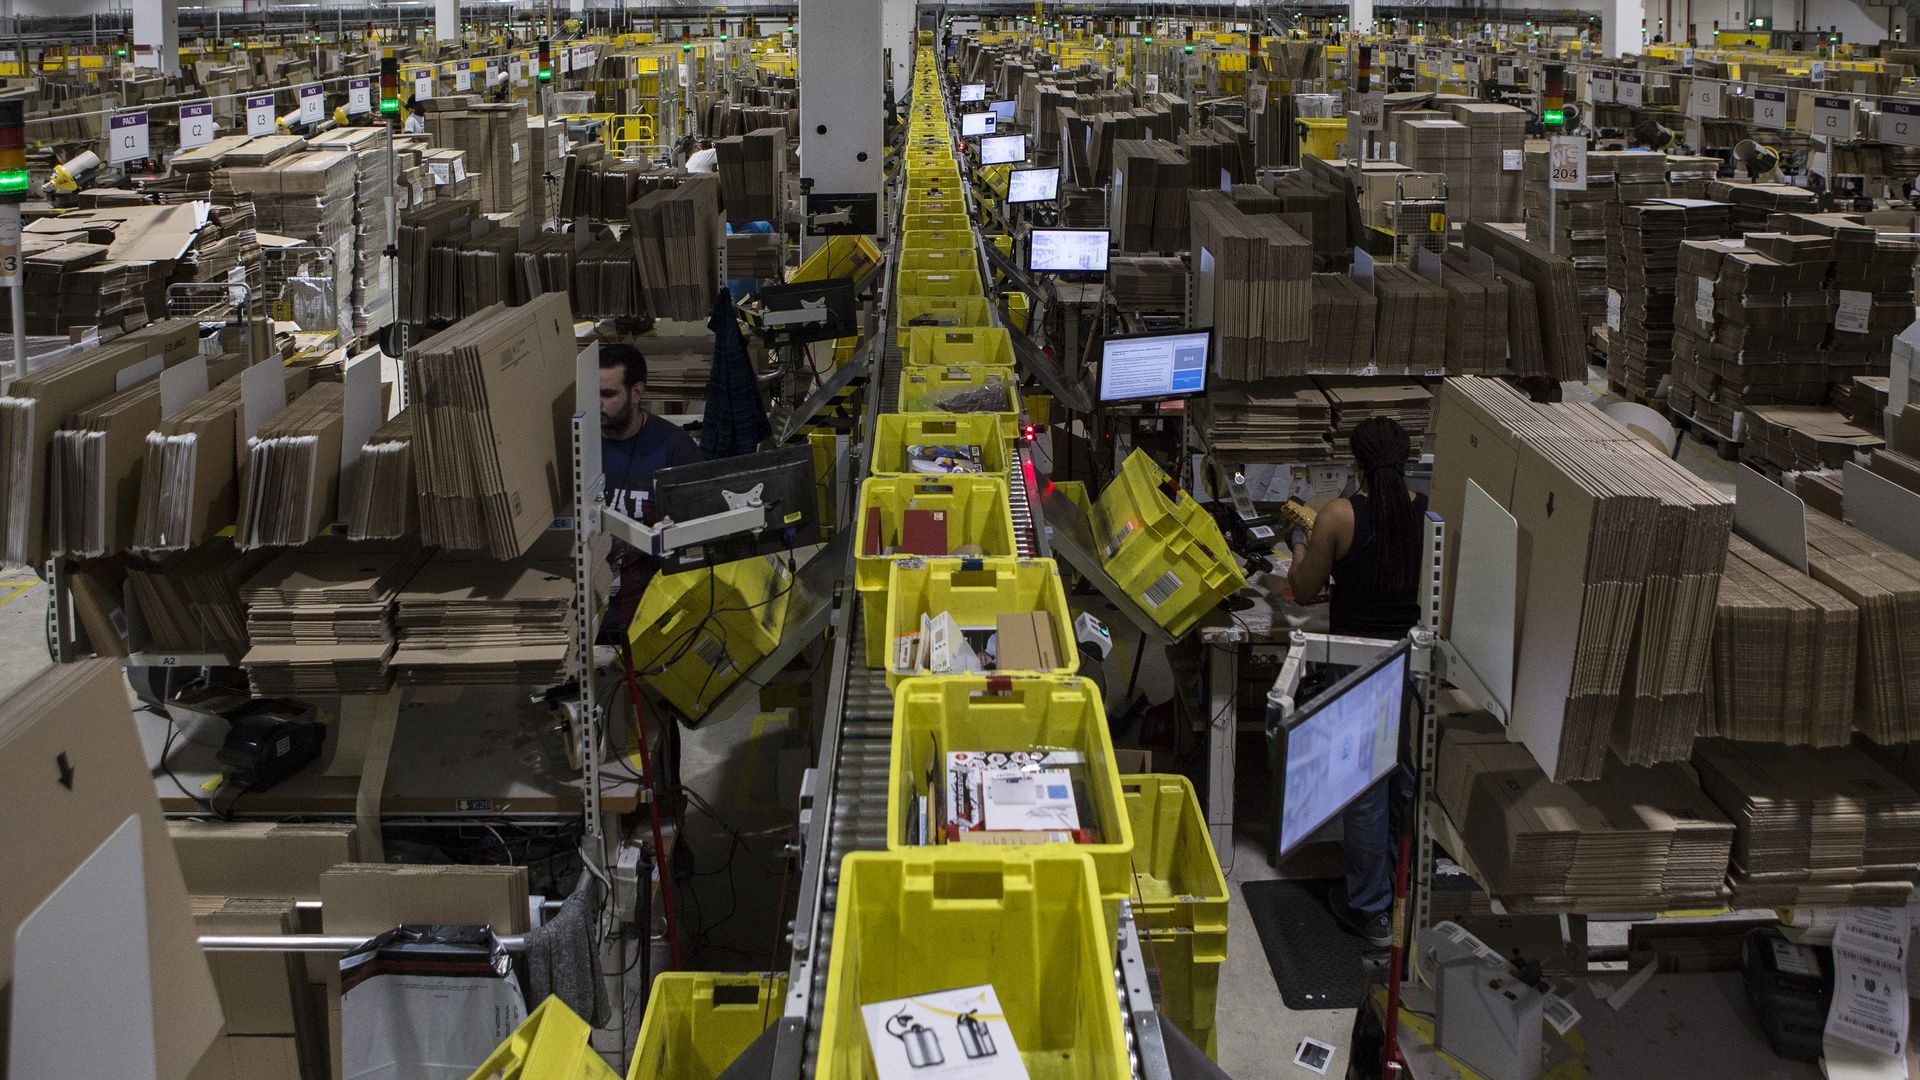 Aerial view of Amazon fulfillment center